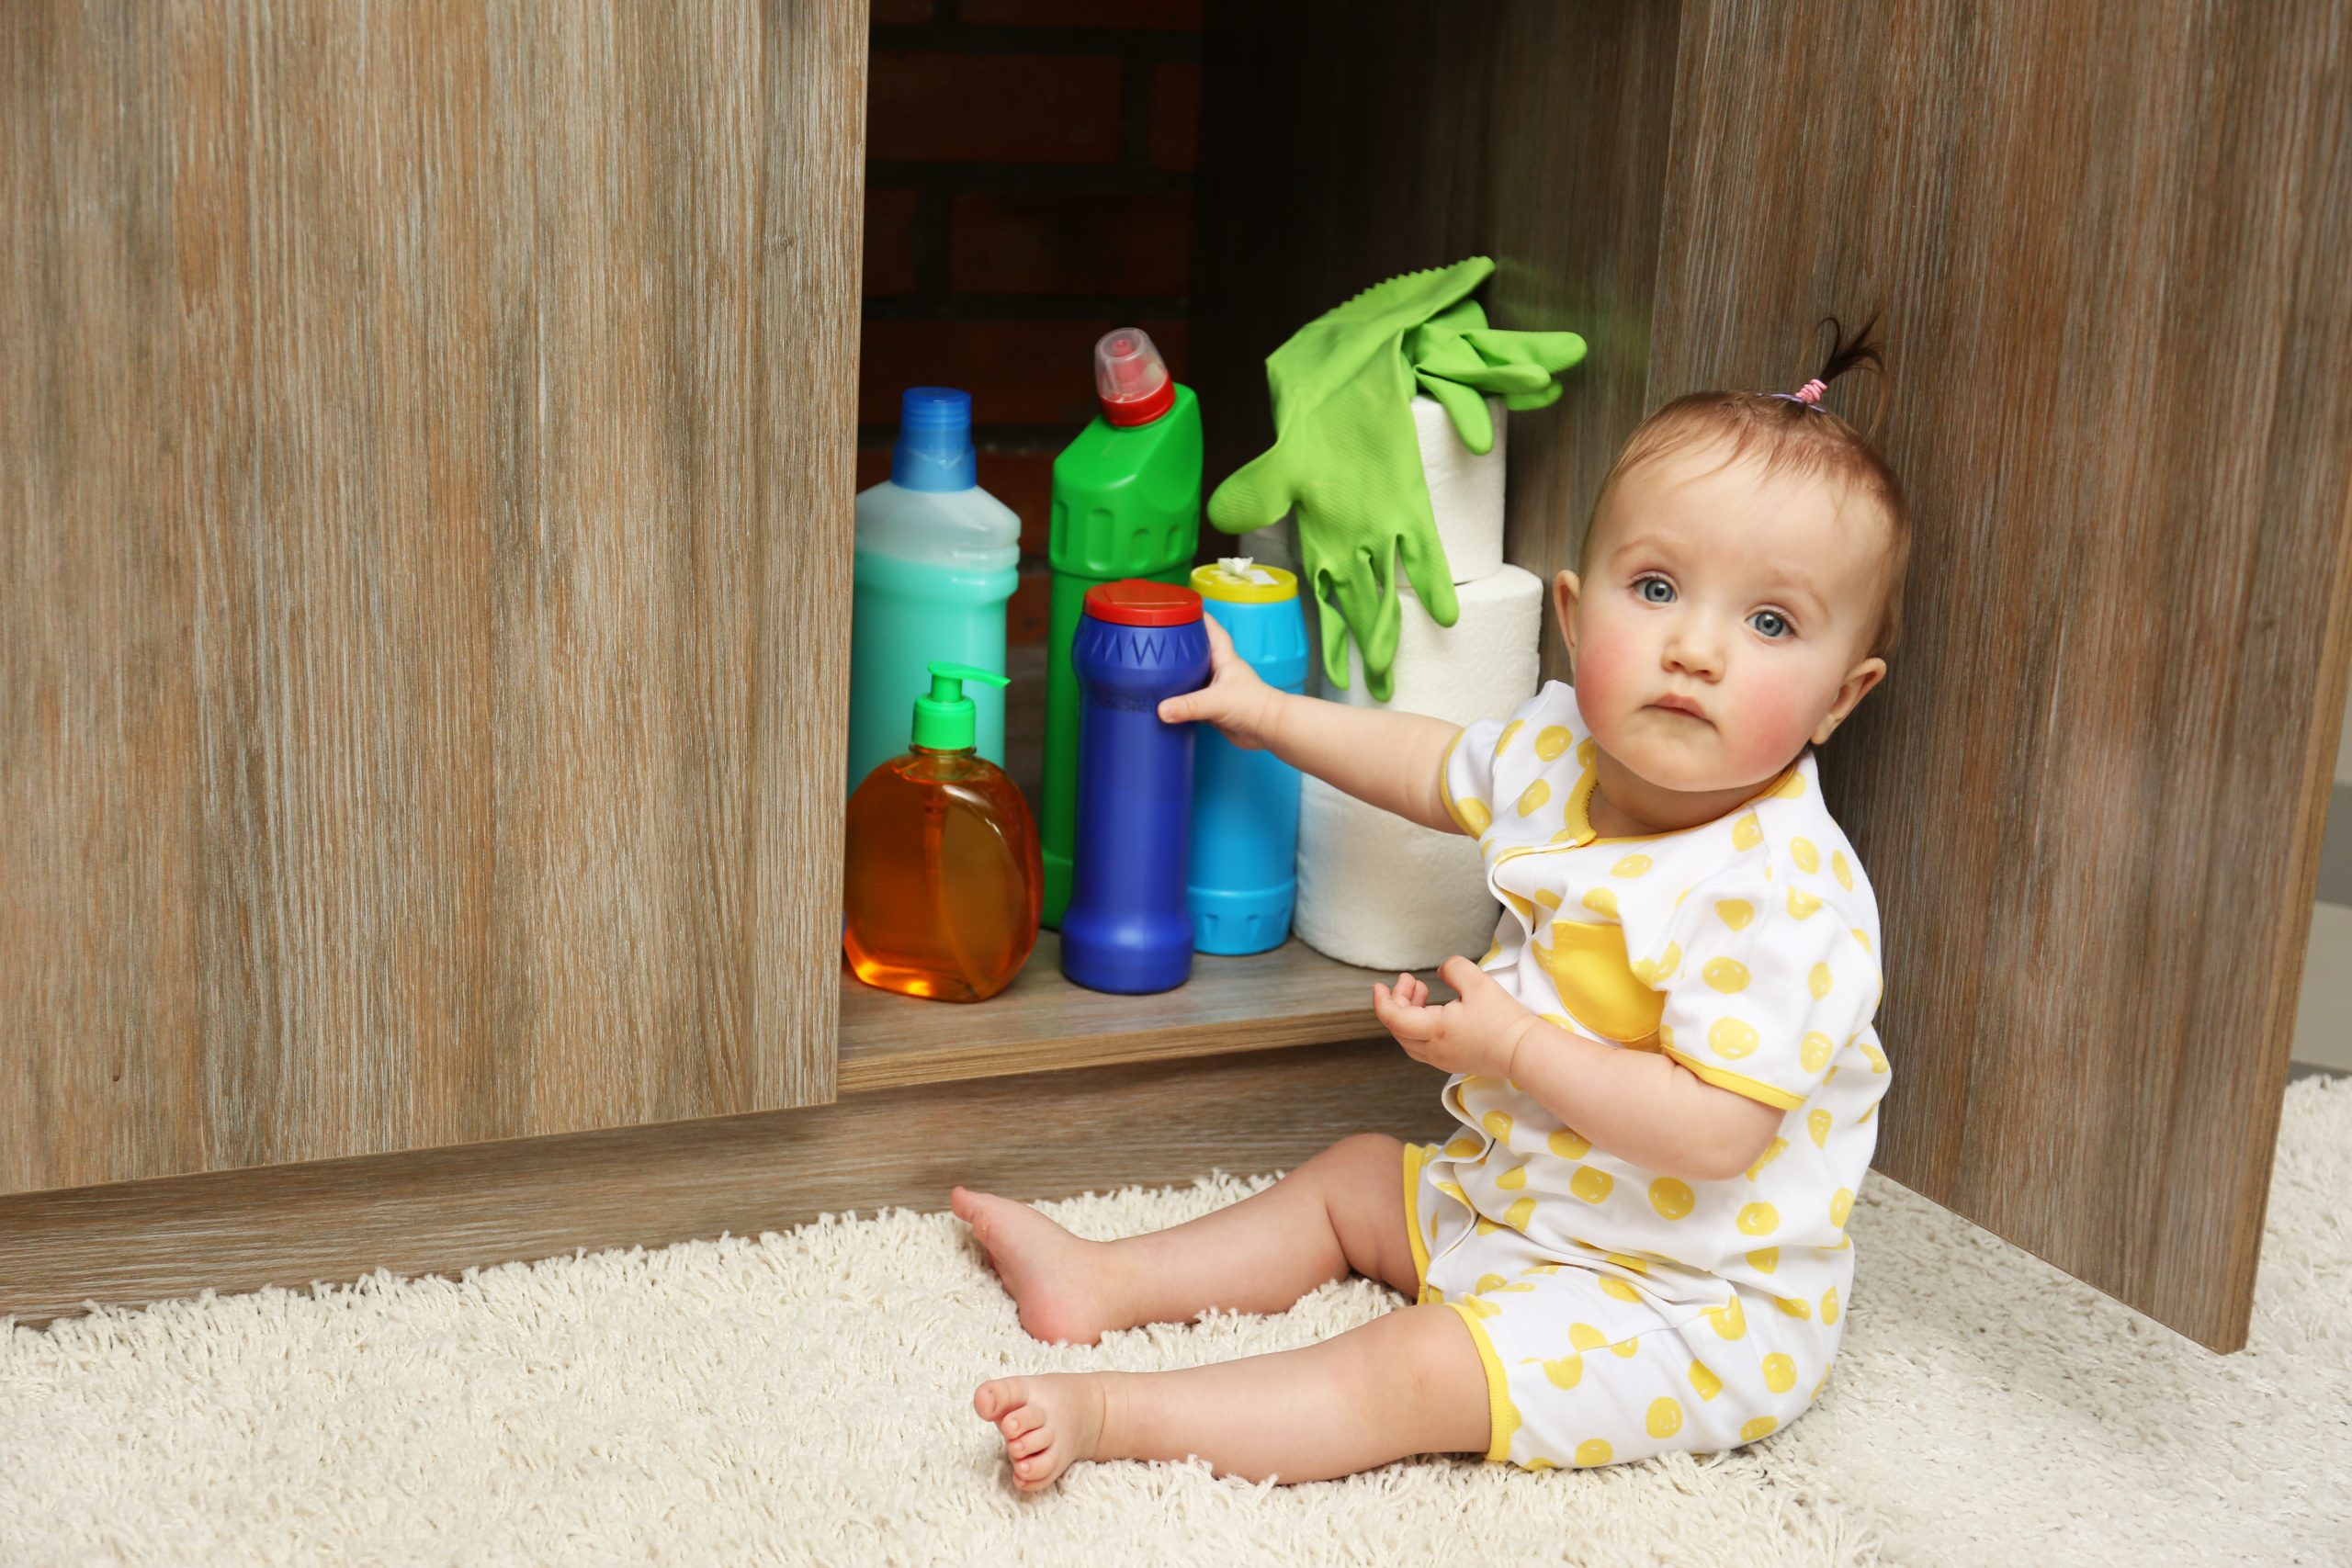 Other Types of Accidental Poisonings and Exposures